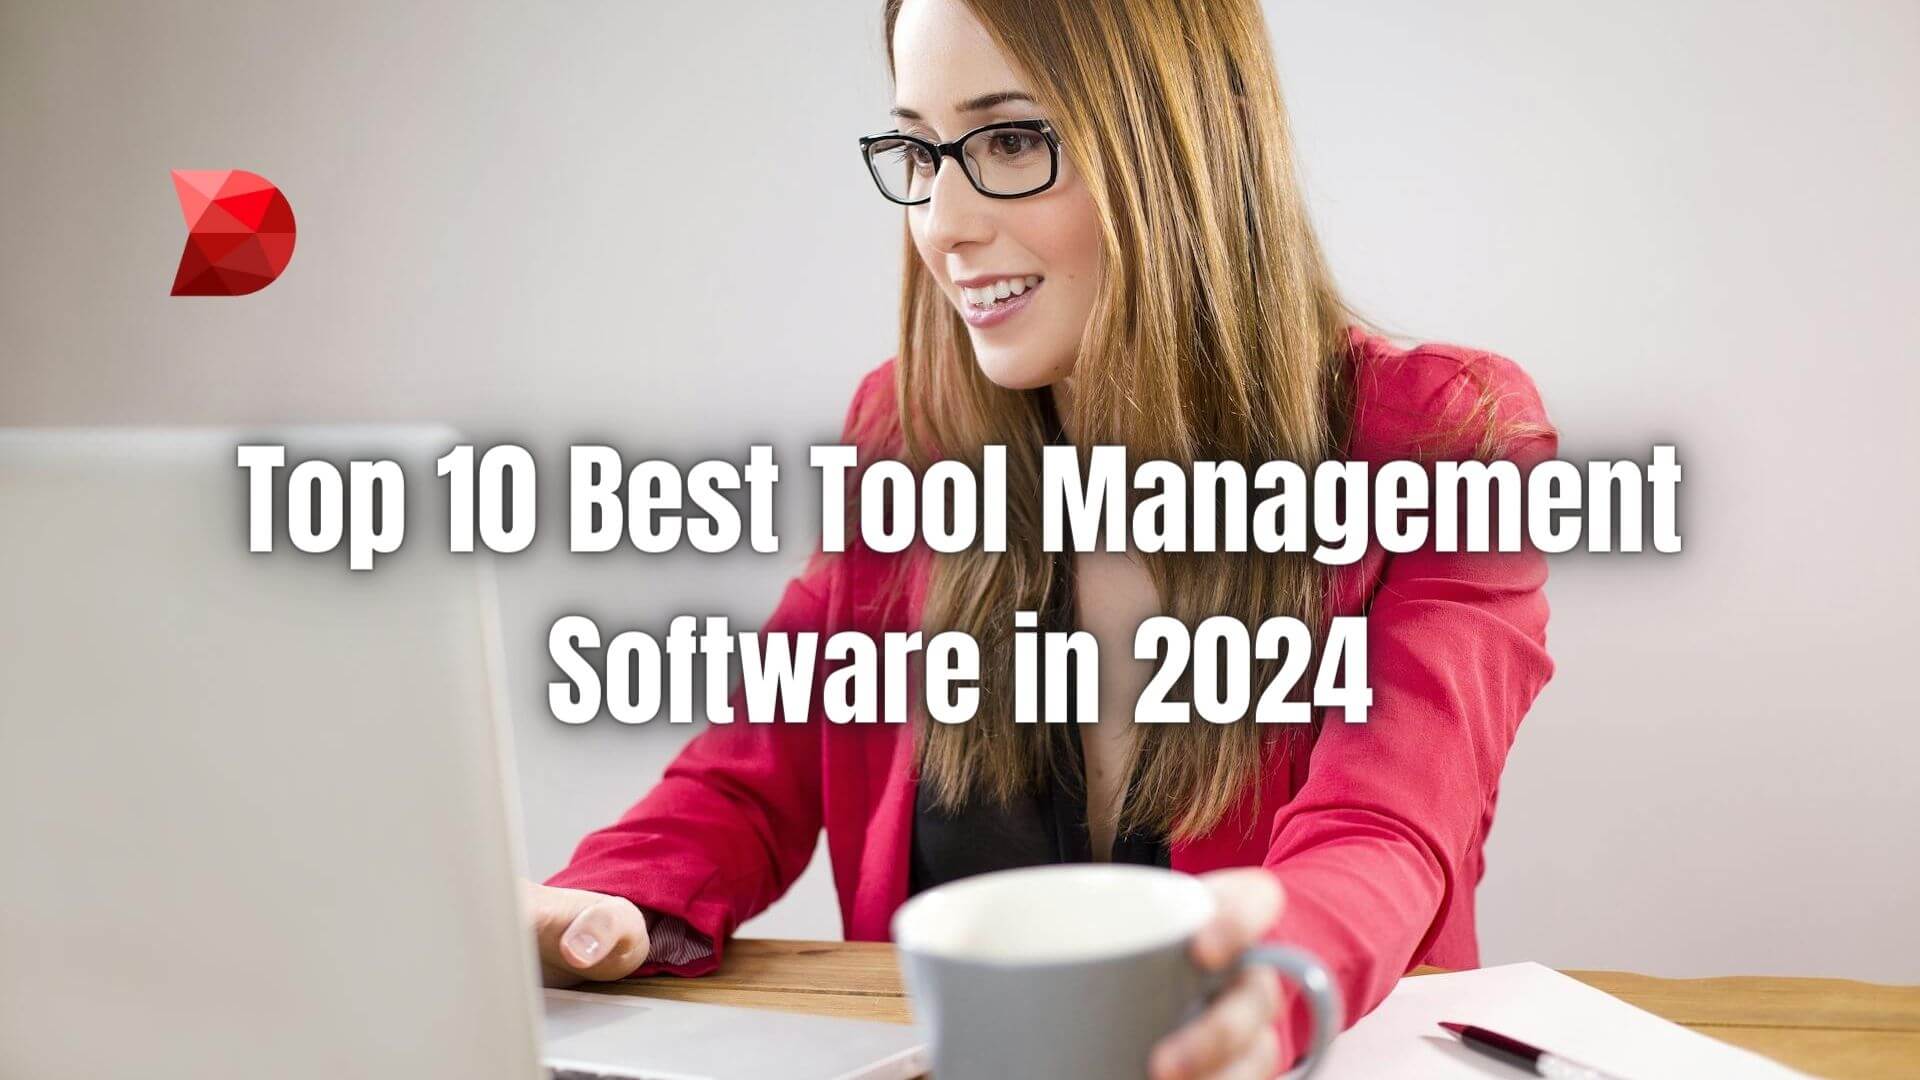 Optimize your workflow with our guide to the best tool management software in 2024. Explore our top 10 picks for increased efficiency!